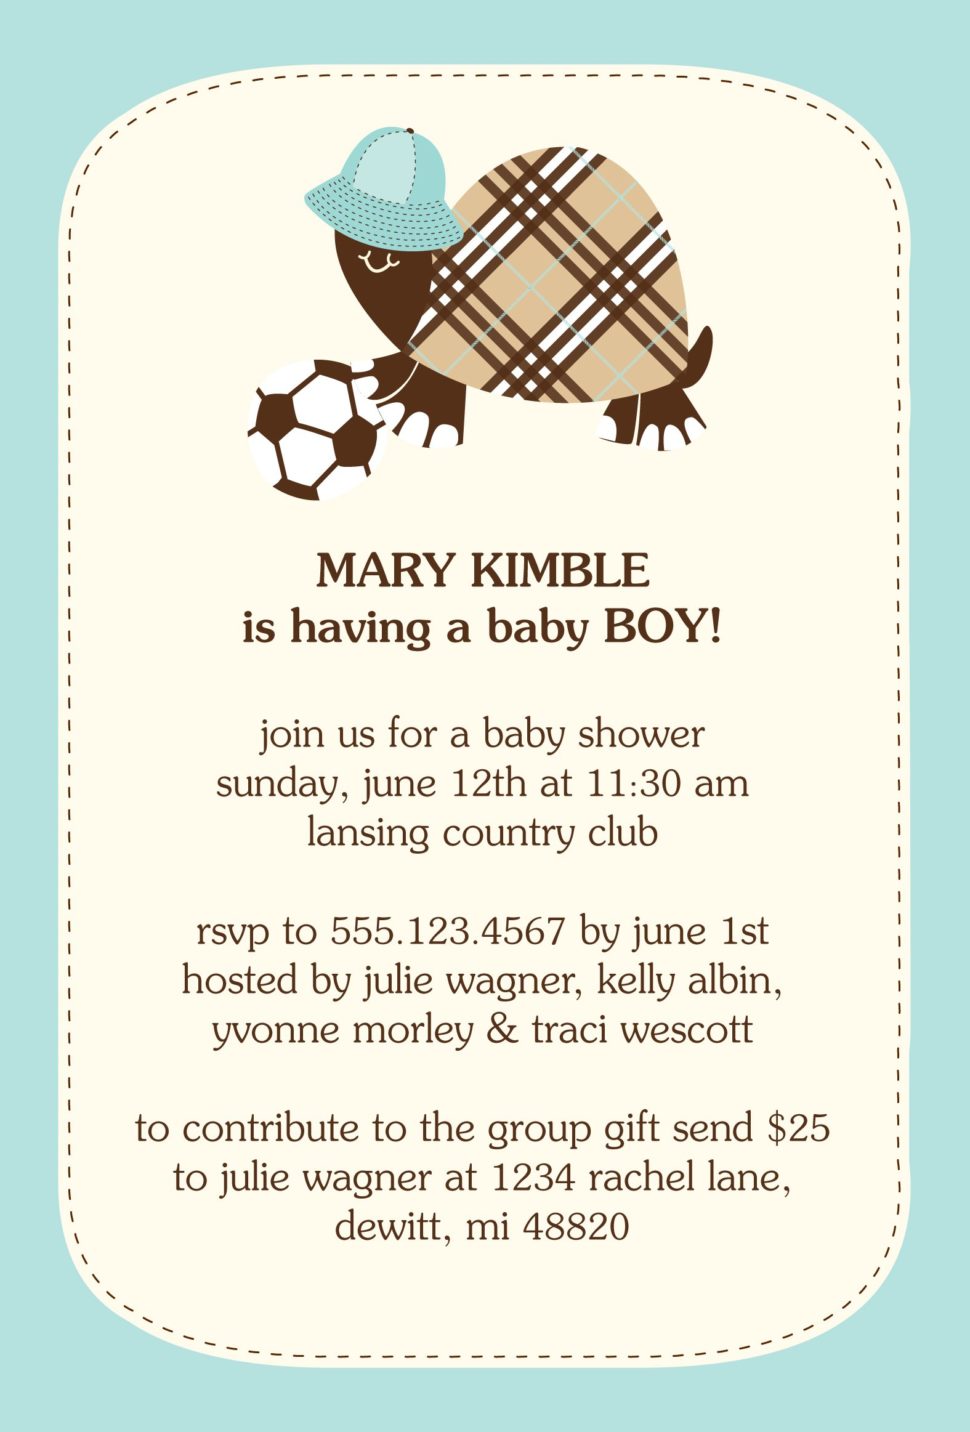 Medium Size of Baby Shower:delightful Baby Shower Invitation Wording Picture Designs Baby Shower Halls With Baby Shower At The Park Plus Recuerdos De Baby Shower Together With Fun Baby Shower Games As Well As Baby Shower Hostess Gifts And Baby Shower Verses